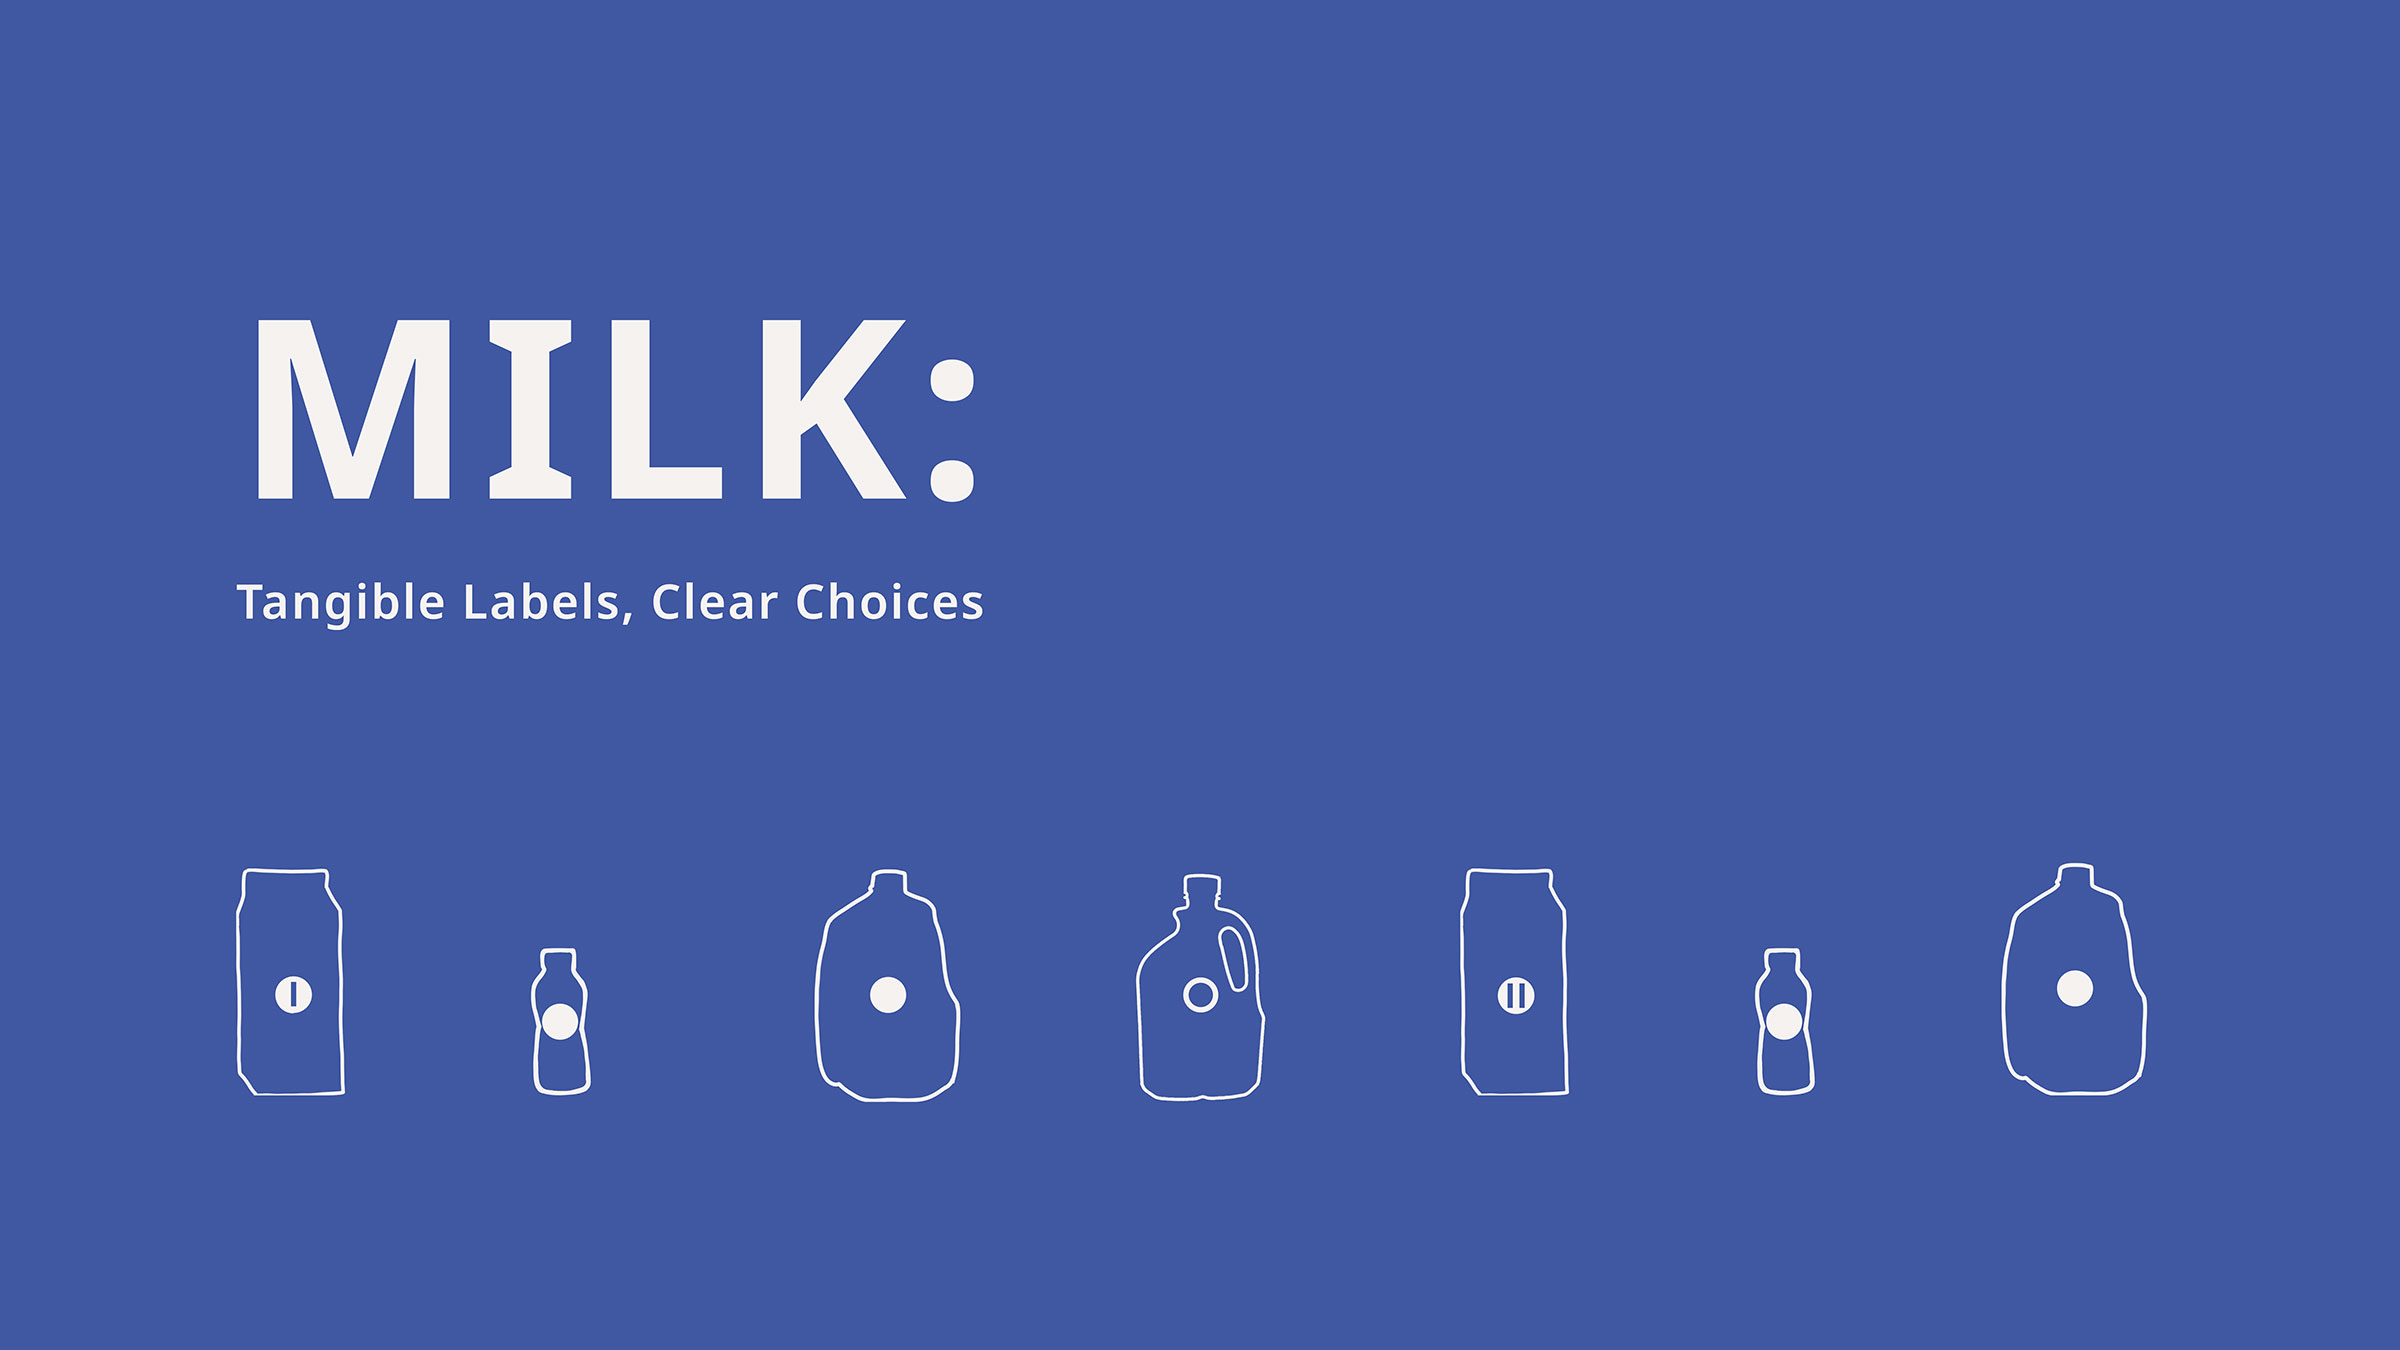 Slide deck cover page. Title: Milk. Subtitle: Tangible Labels, Clear Choices.